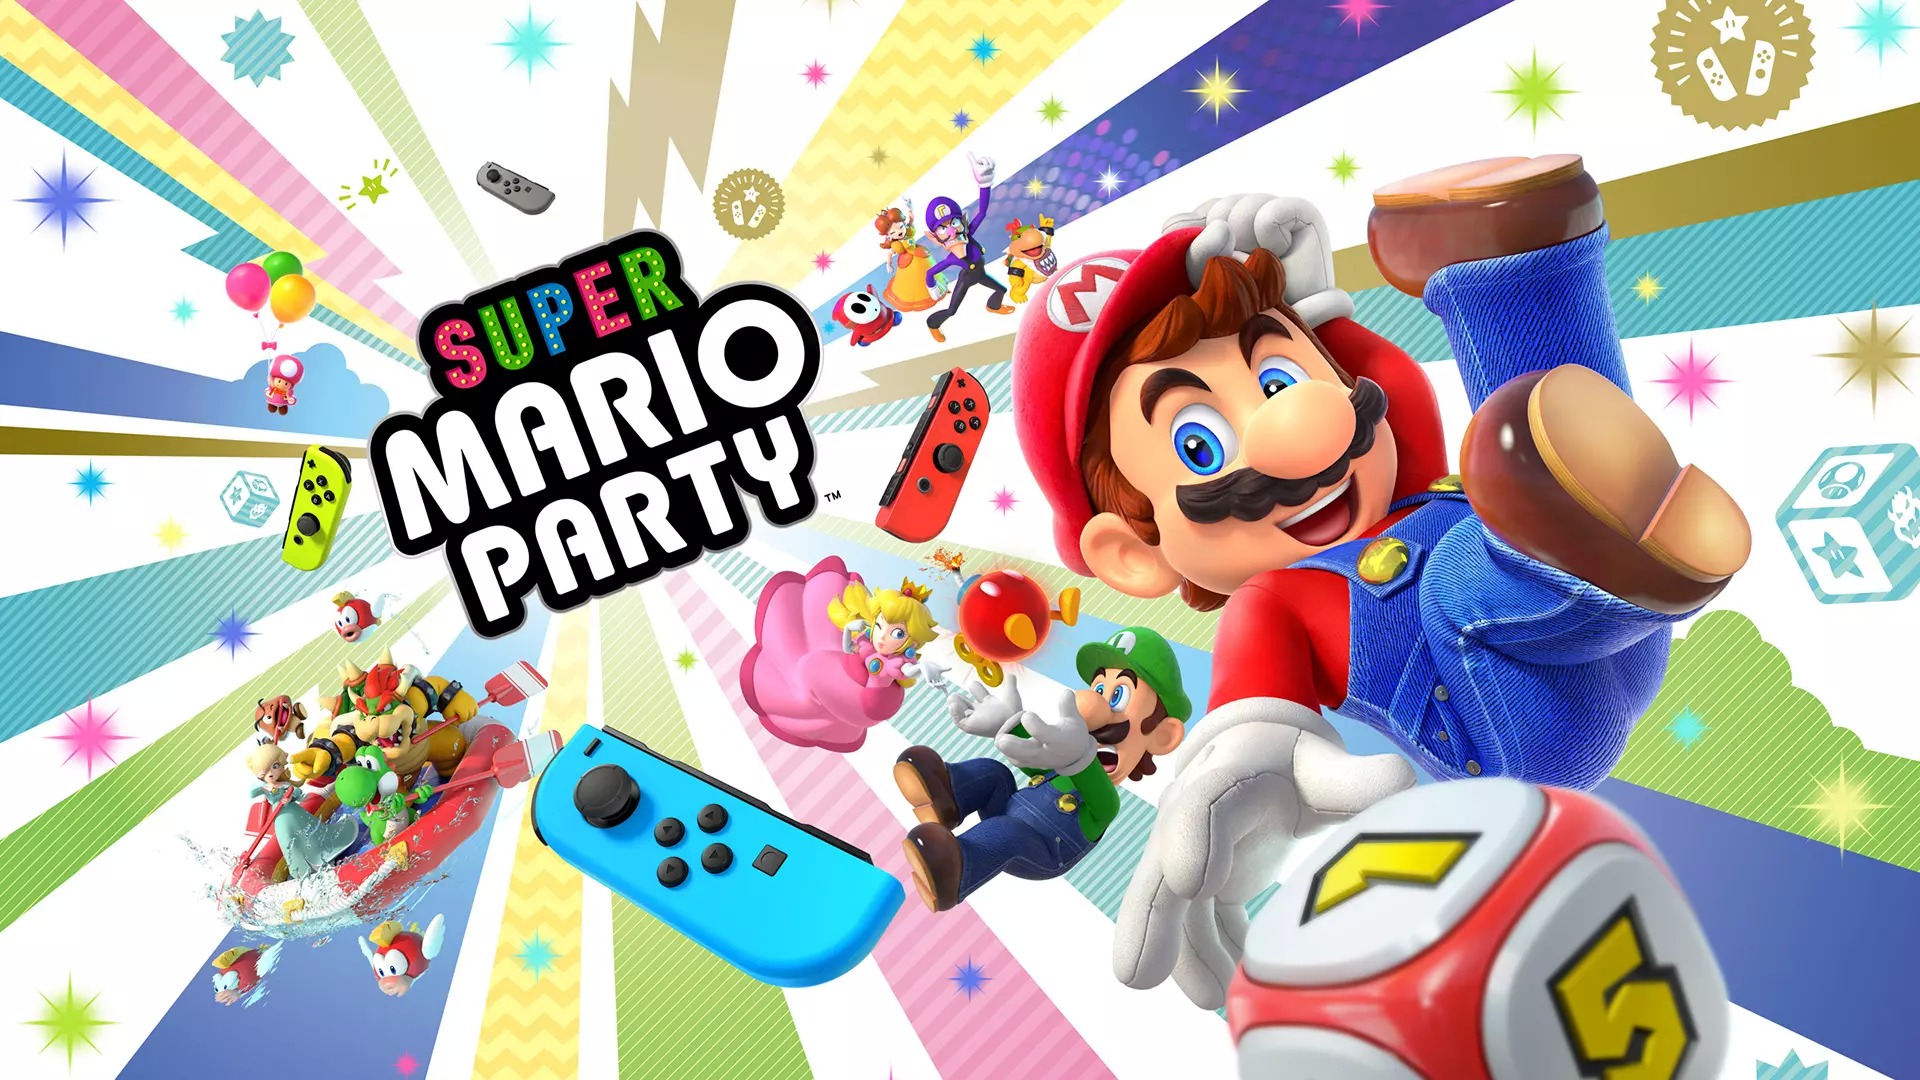 Logo image of Super Mario Party, showing aspects of the game including dice and controllers